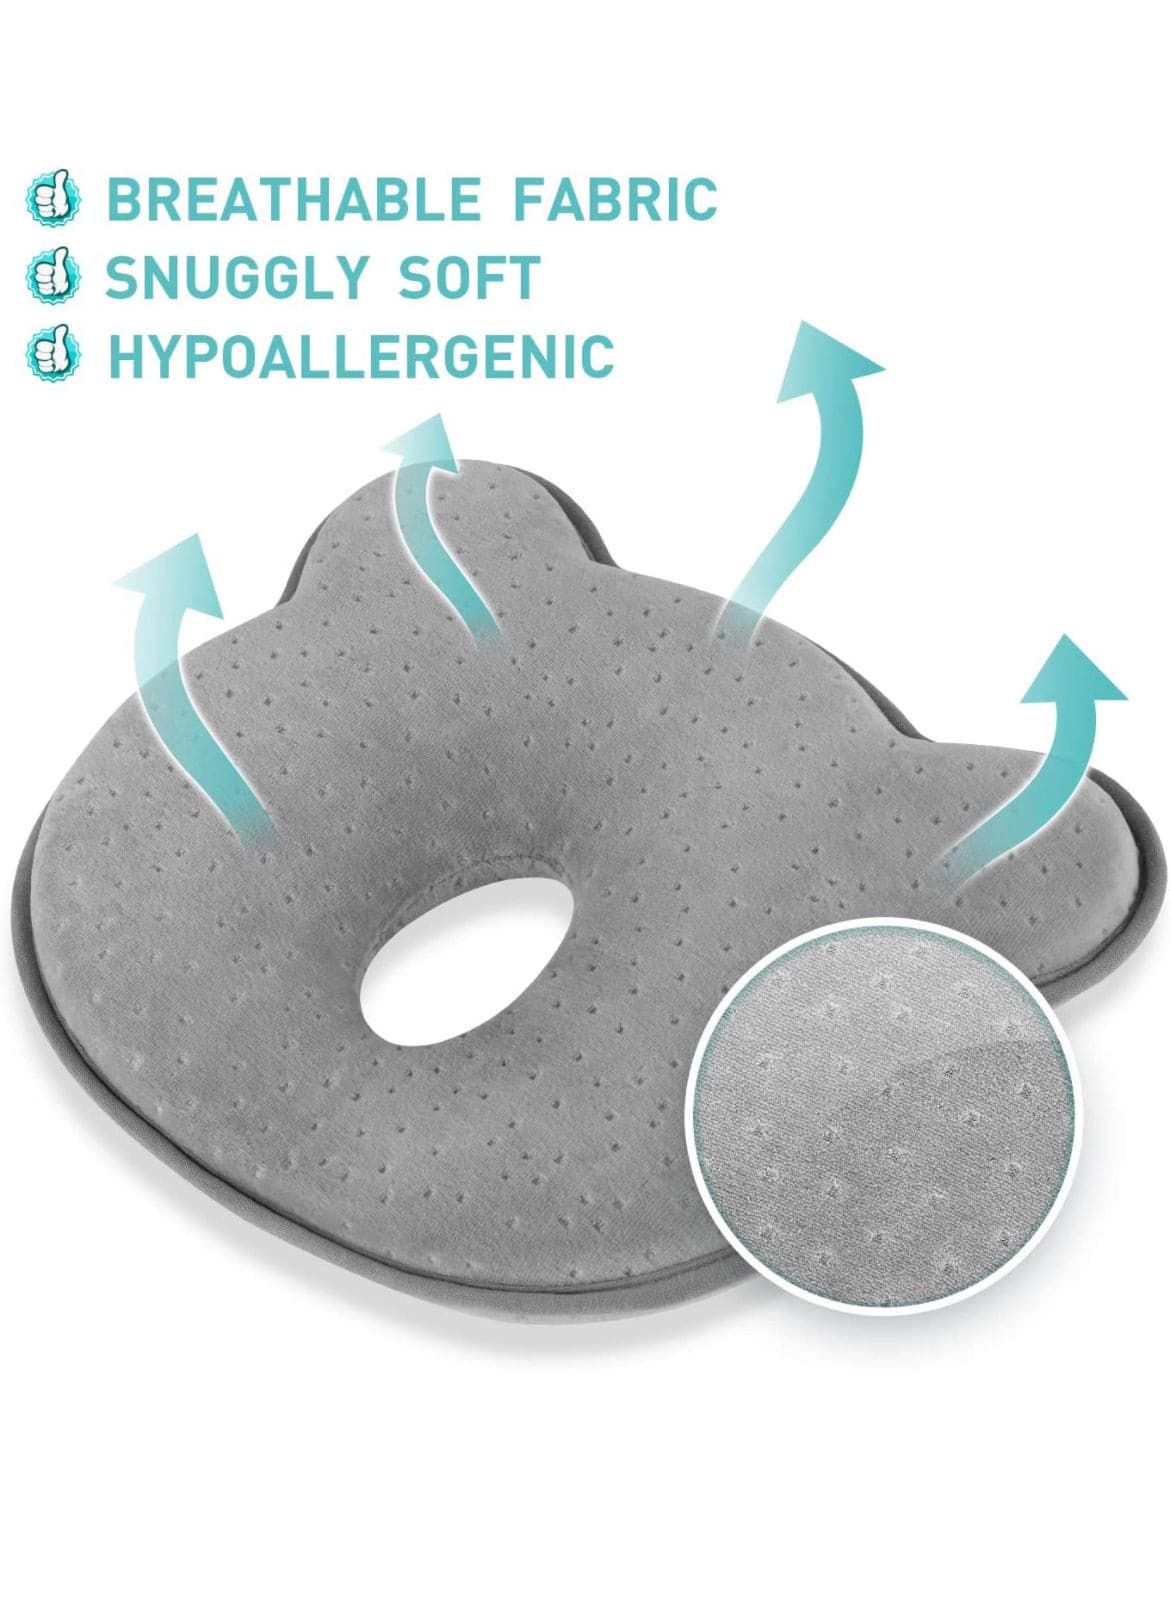 Newborn Baby Head Shaping Pillow,Preventing Flat Head Syndrome(Plagiocephaly),Made of Memory Foam Head and Neck Support Baby 3D Pillow for 0-12 Months Infant.